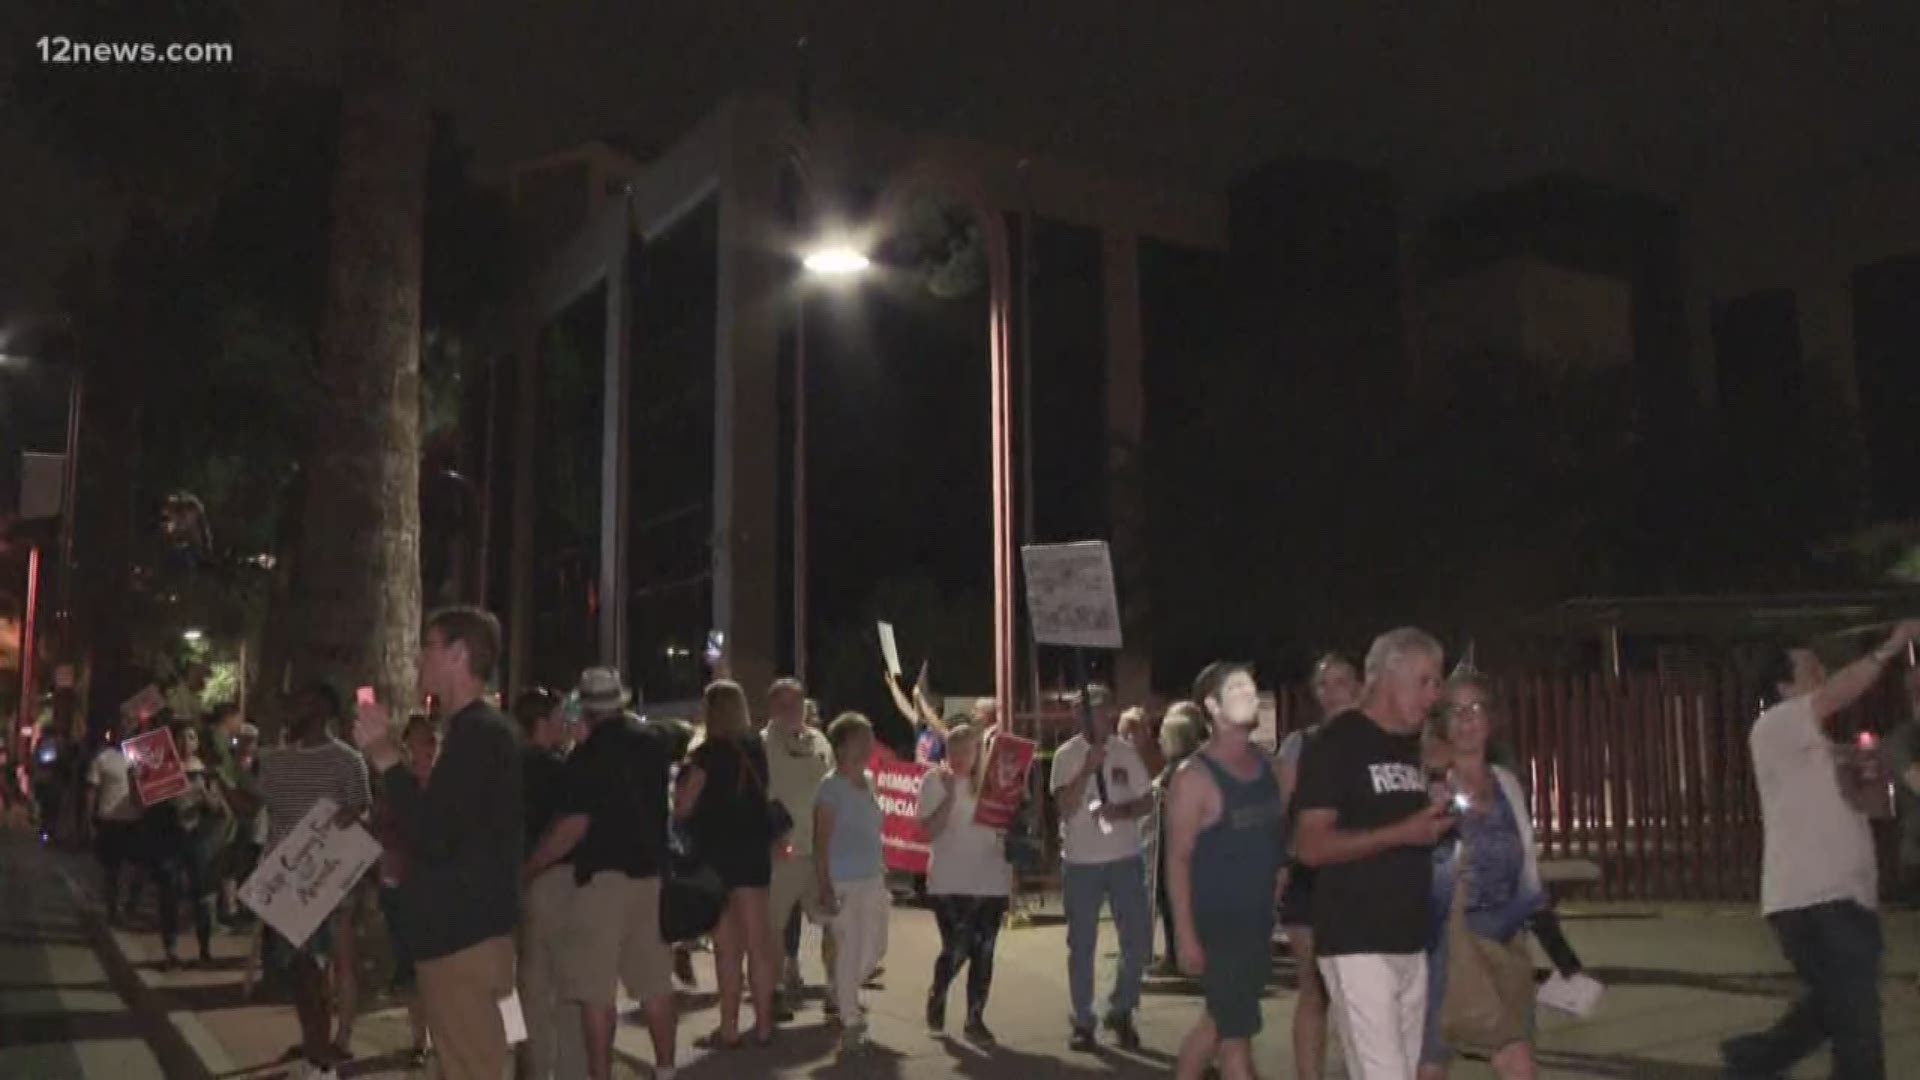 Dozens of protesters shut down a central Phoenix street on Friday night over reported ICE raids across the country.